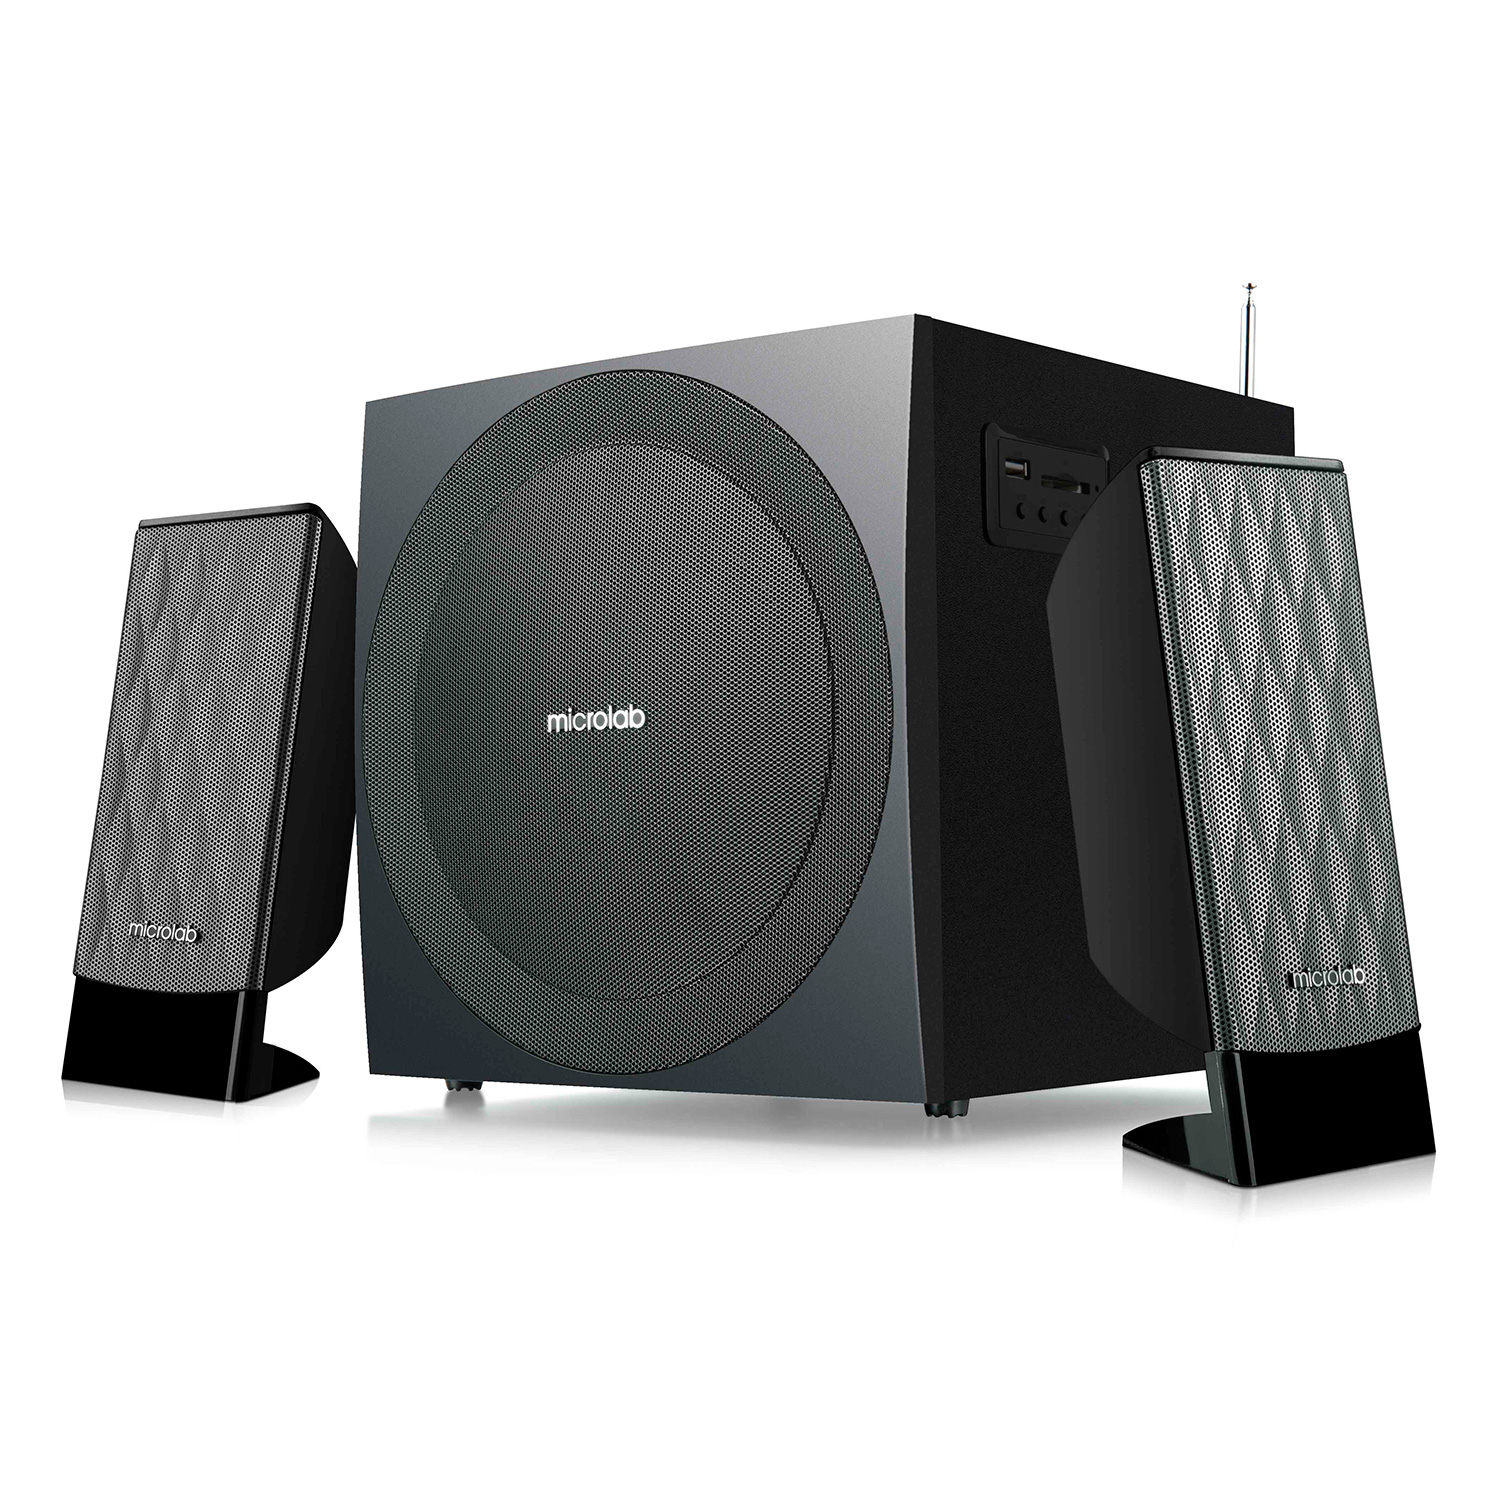 Microlab M-300BT Sub Woofer with Bluetooth and FM – Metro Computer Technology